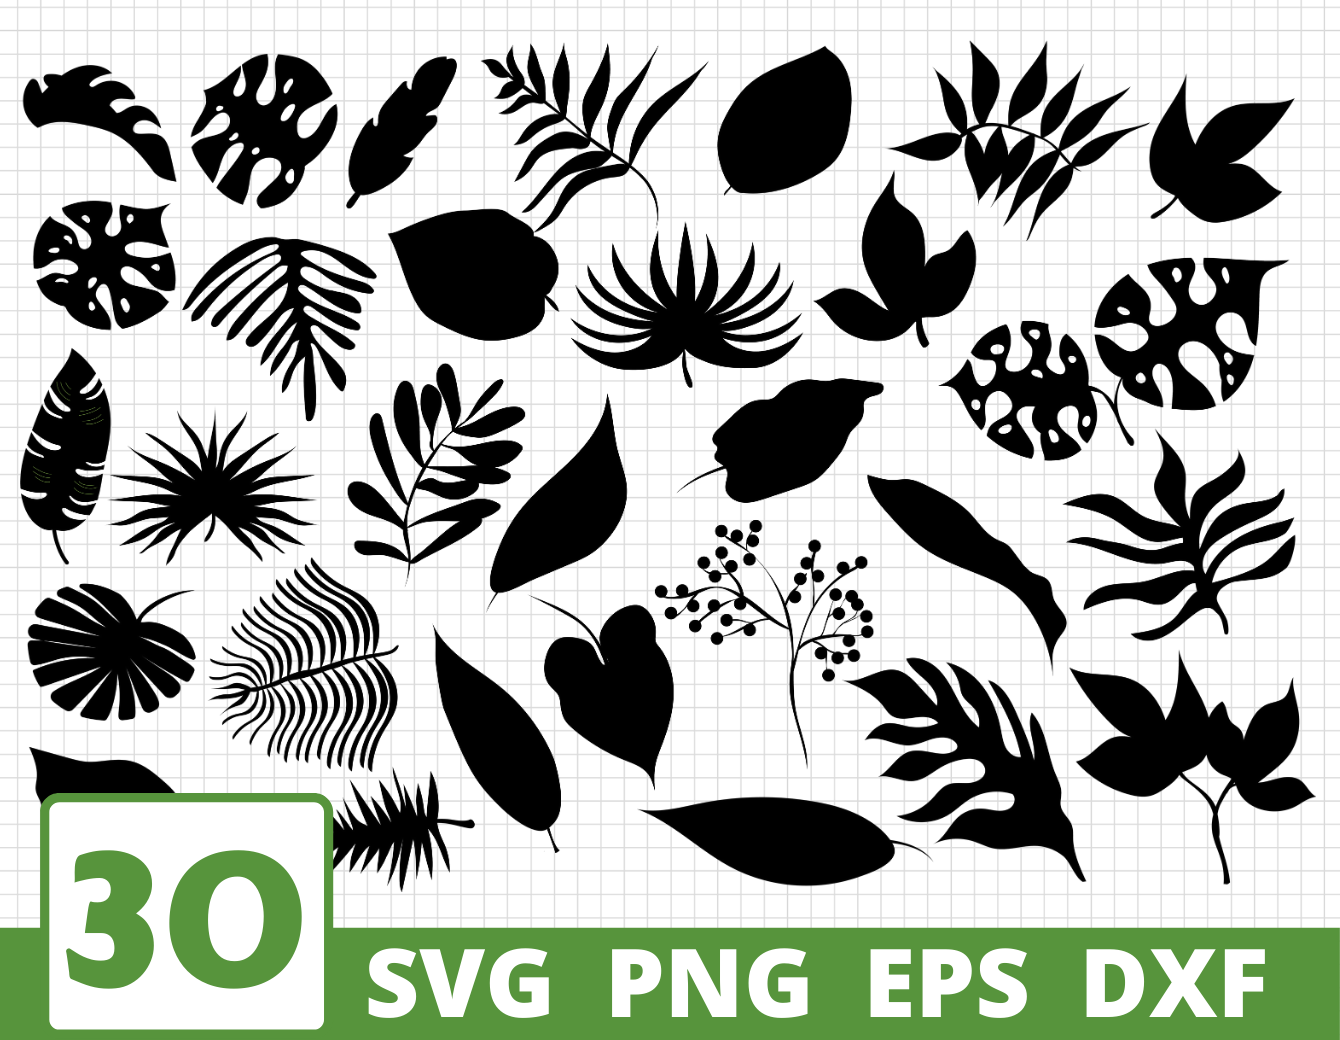 Floral Leaves Svg Clipart Bundle Colorful Leaf Svg Cut File Golden Leaves Clipart Instant Download Files For Cricut Cameo Silhouette Gg0282 Art Collectibles Digital Prints Mtacademy Co Il